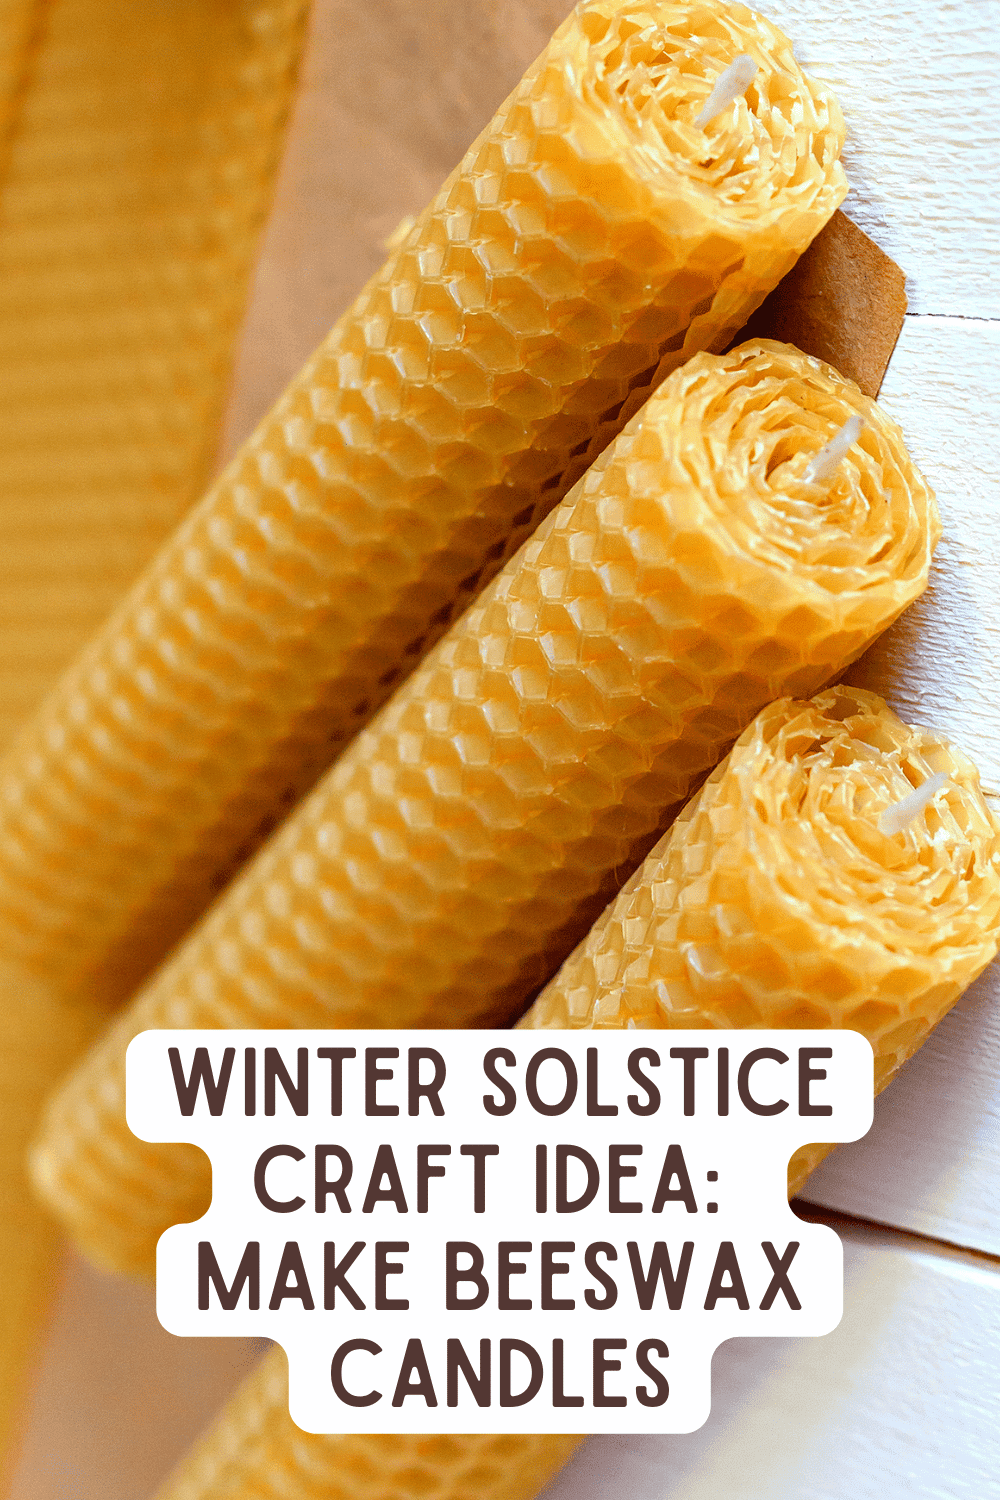 Winter Solstice Craft Projects Ideas - Homemade Beeswax Candles